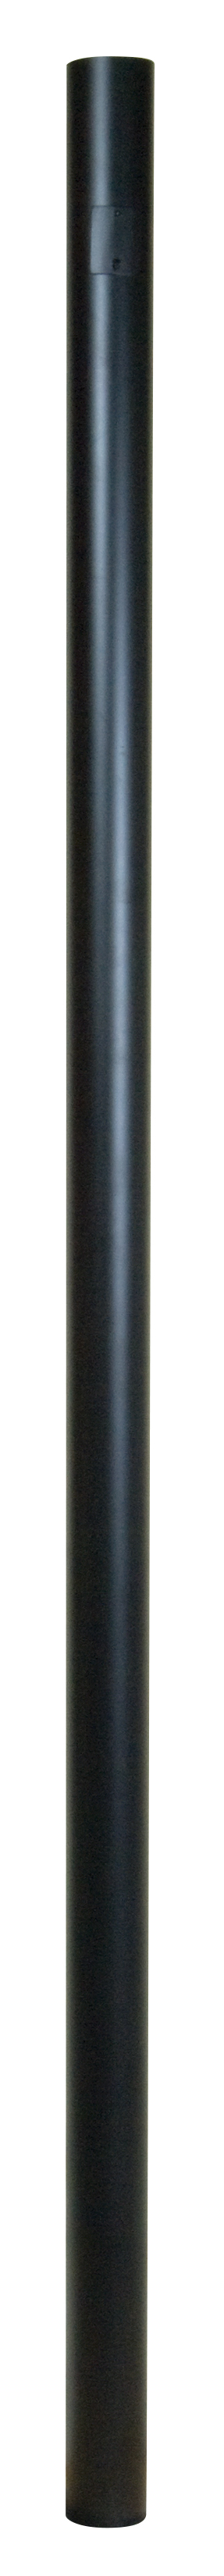 84" Smooth Direct Burial Post in Textured Black